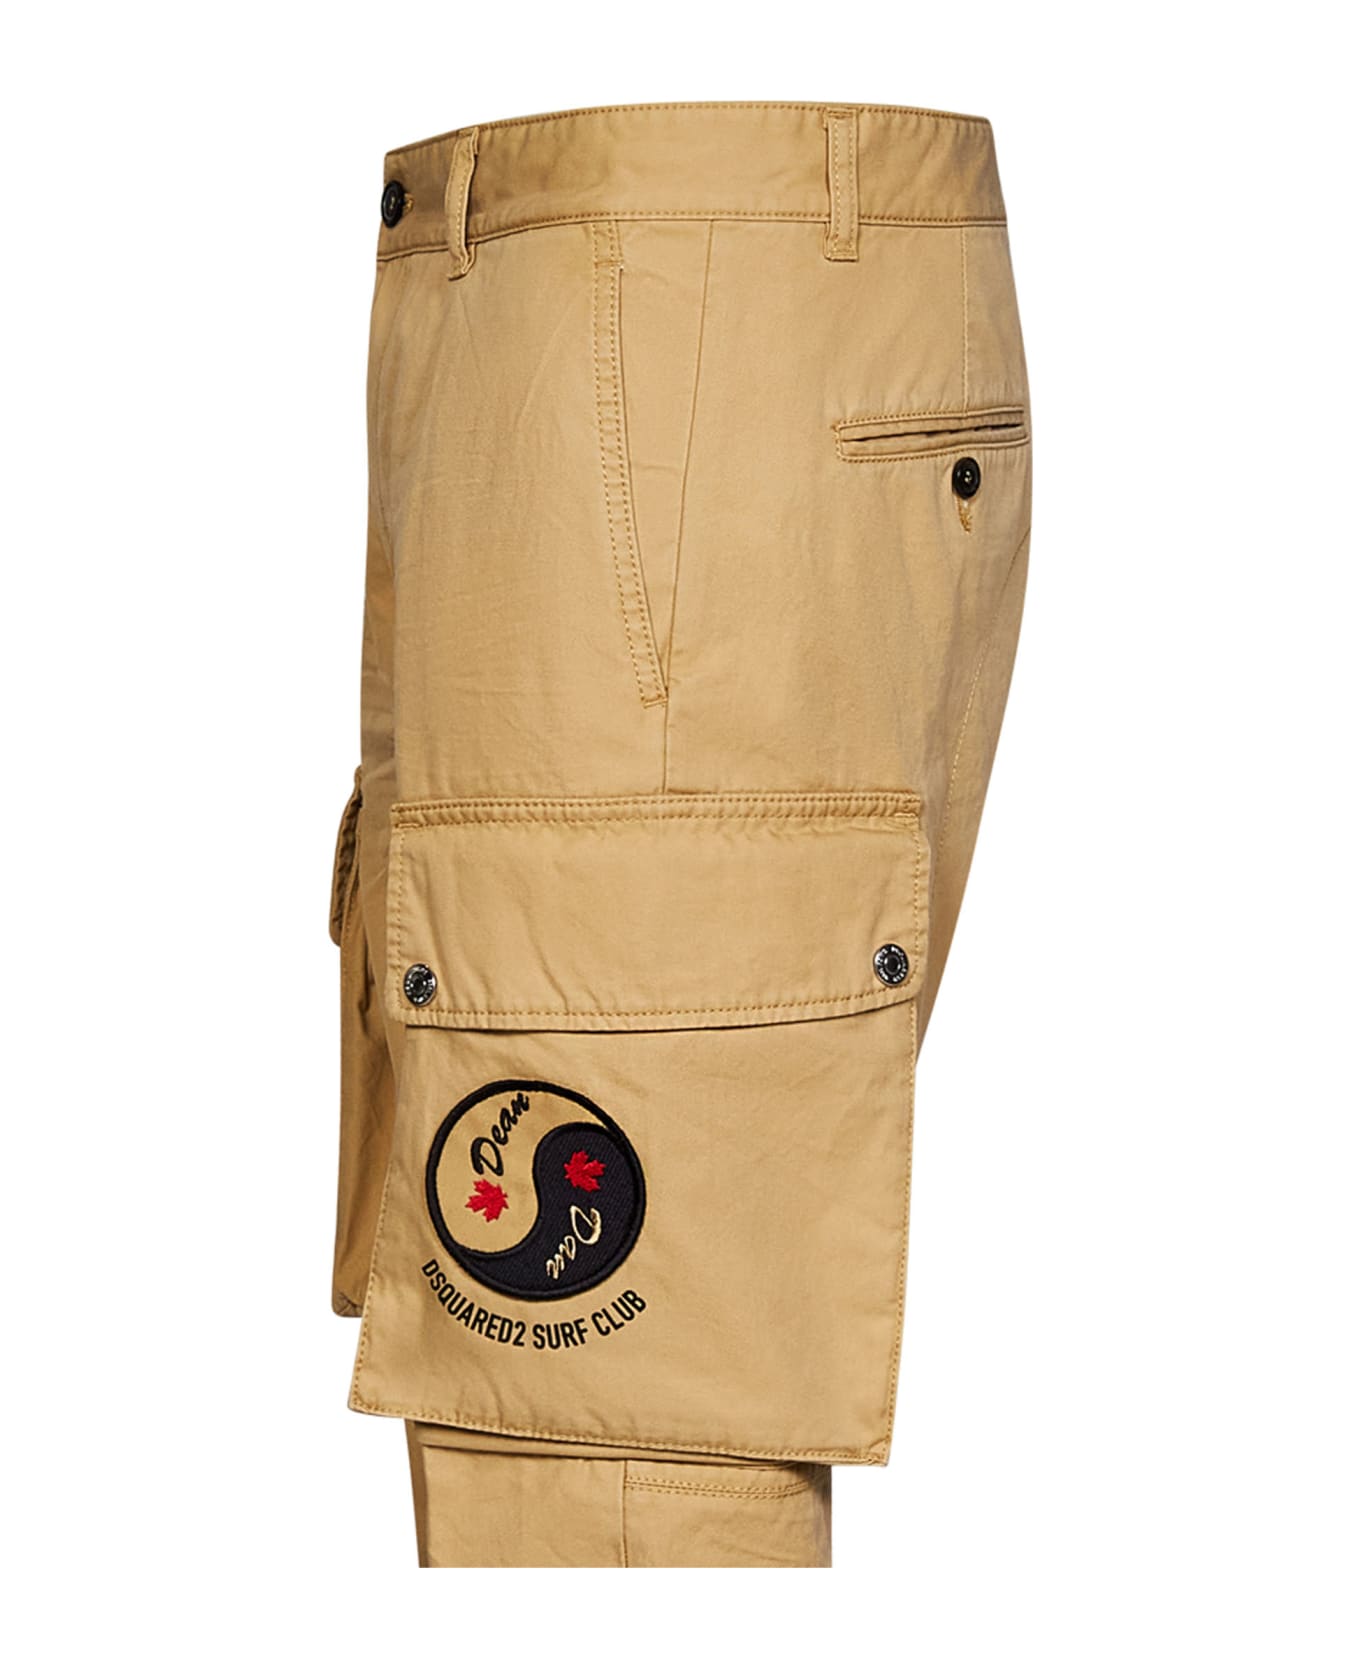 Dsquared2 Sexy Cargo Jeans - Beige ボトムス